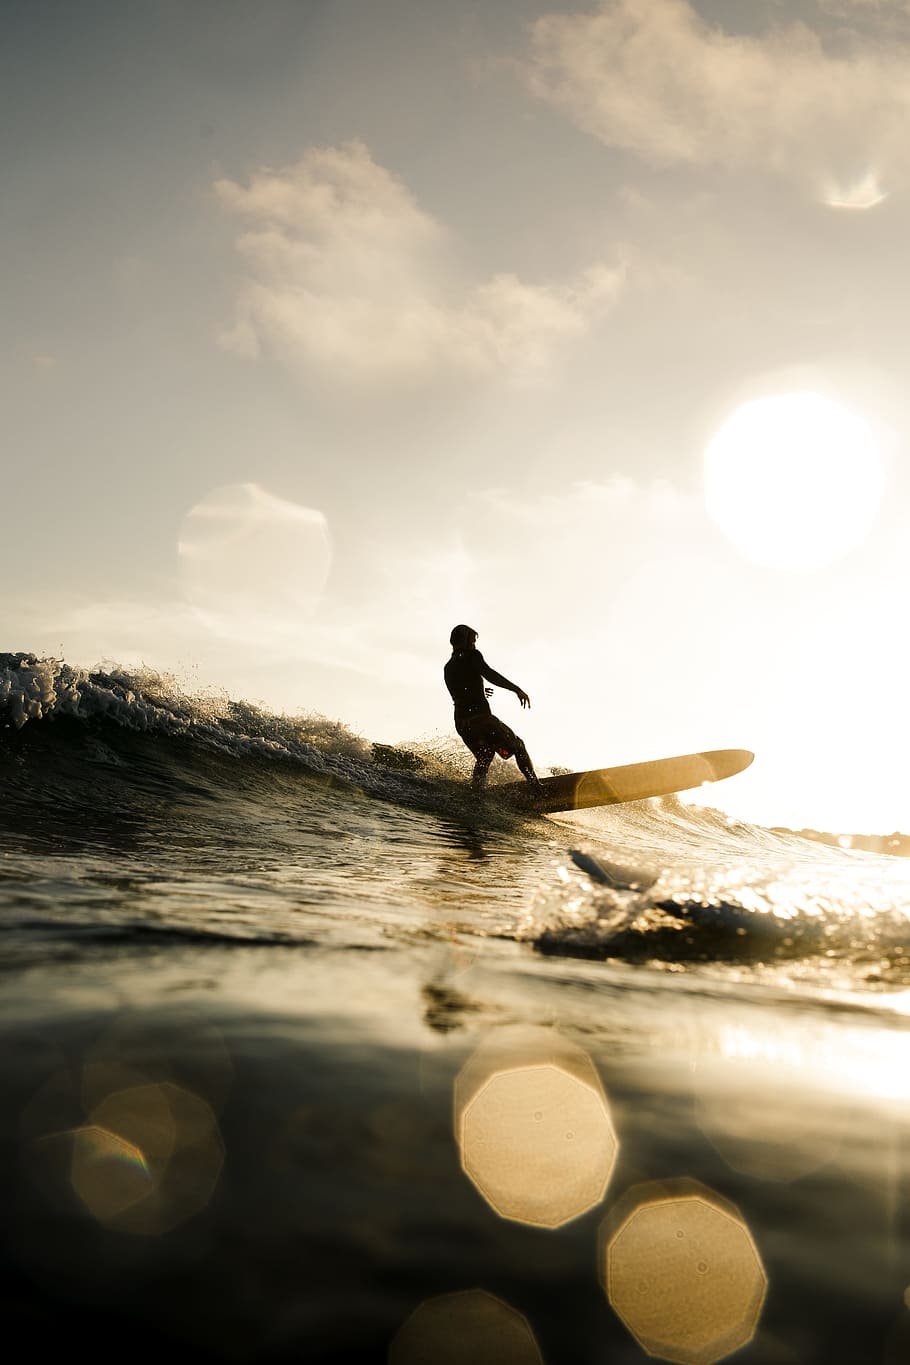 person surfing on wave, surfer, longboard, silhouette, yellow